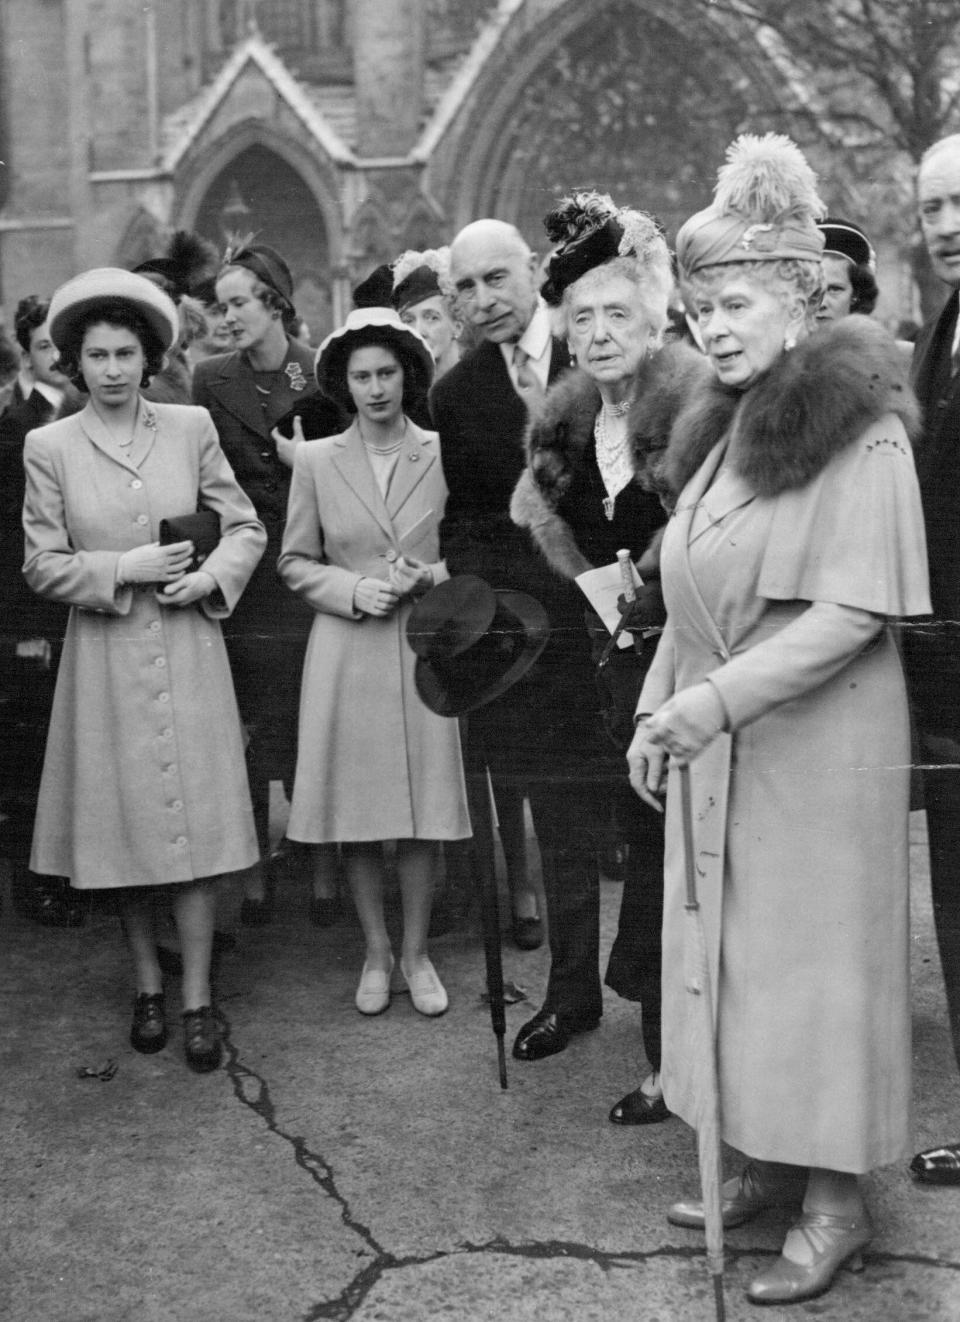 Princess Elizabeth, Princess Margaret, the Earl of Athlone, Mabell, Countess of Airlie, and Queen Mary watch the bridal procession at the Butters' wedding - SuperStock/Alamy